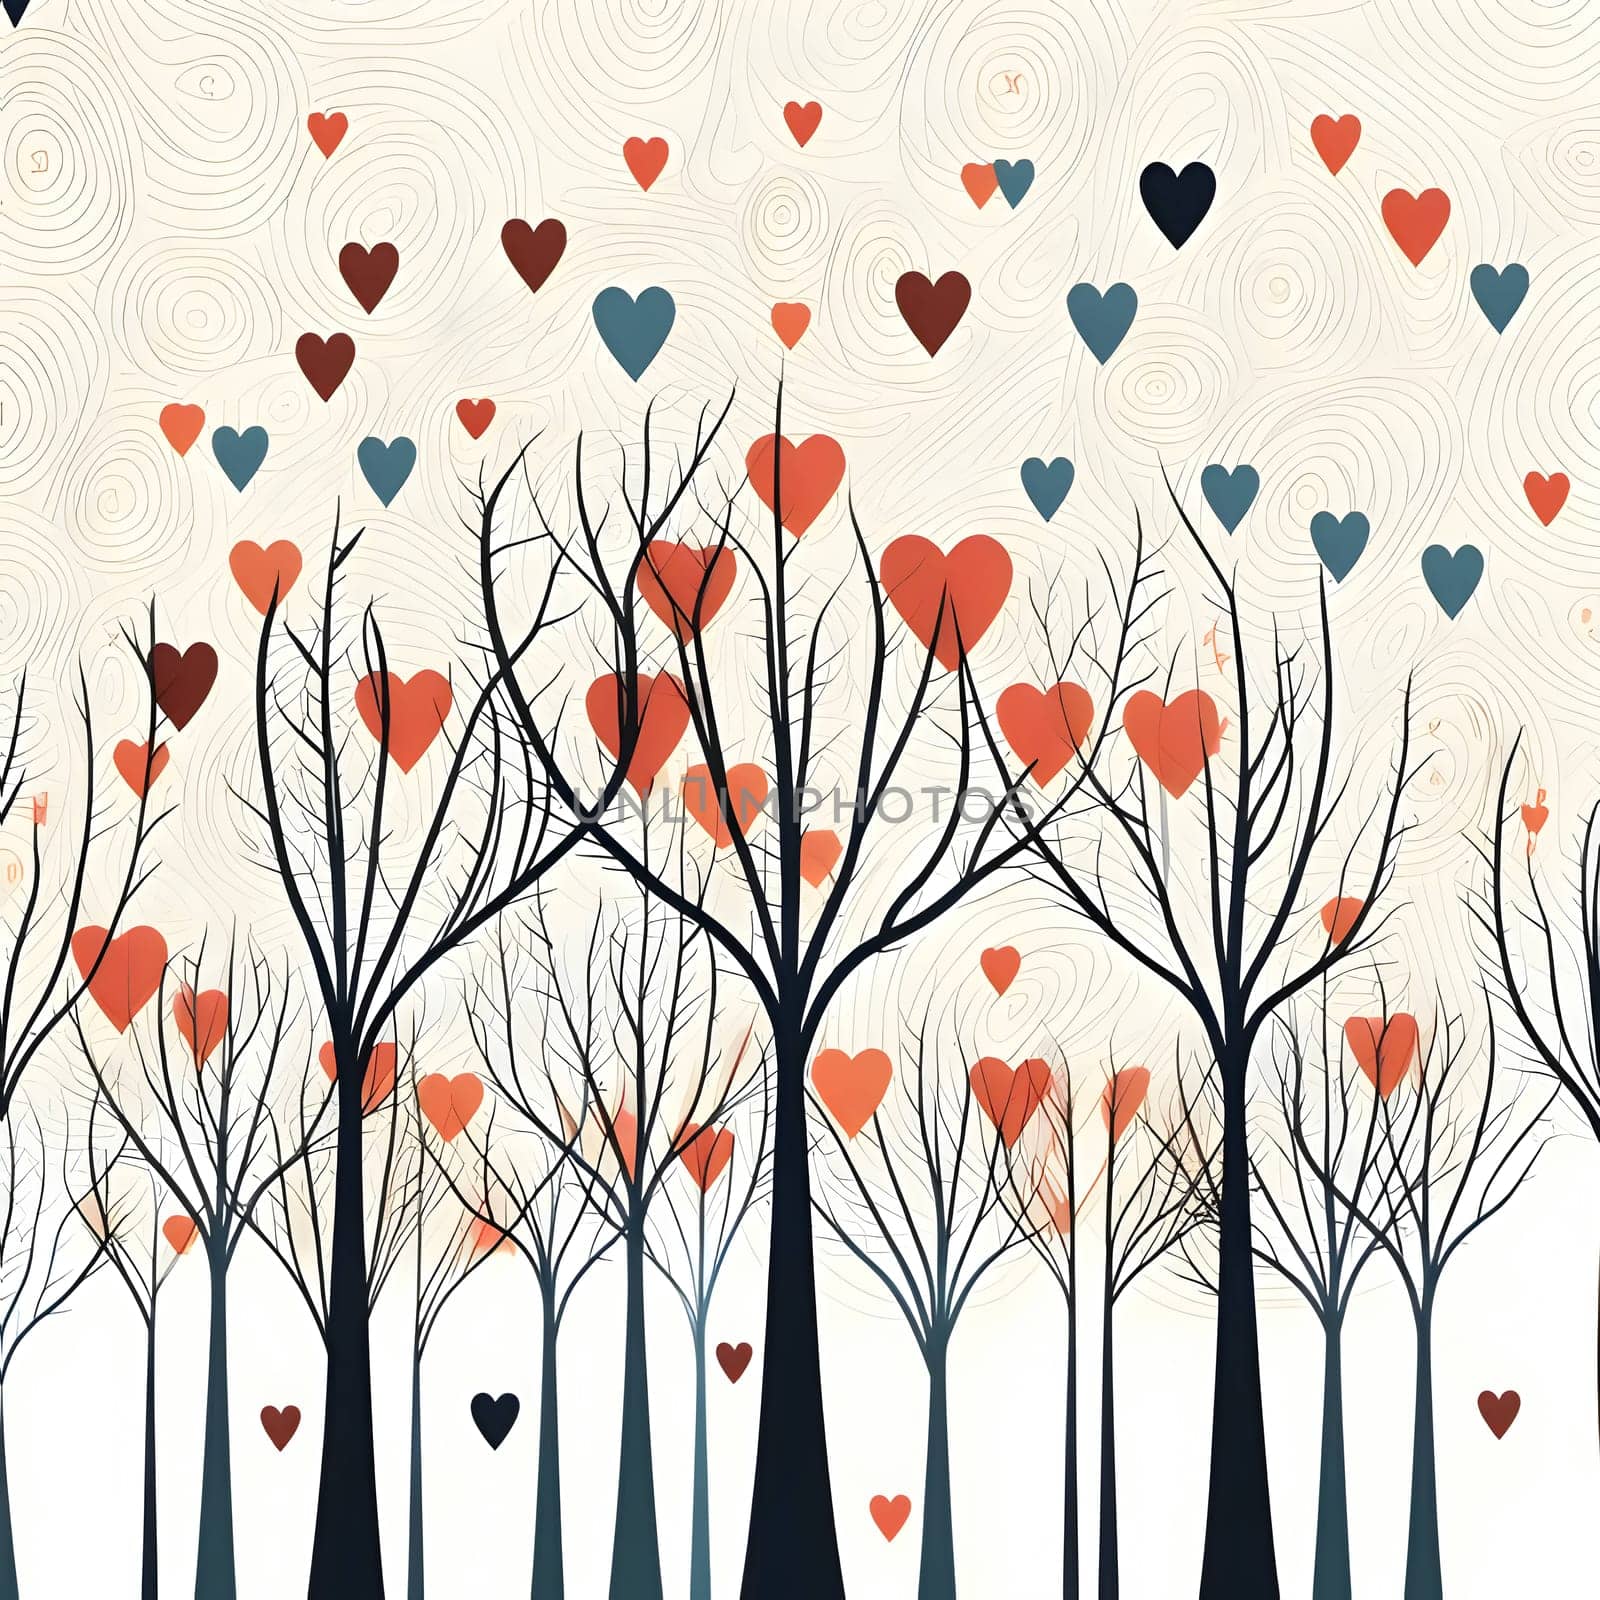 Silhouettes of trees and hearts intertwine, creating a whimsical scene on a pristine white background.